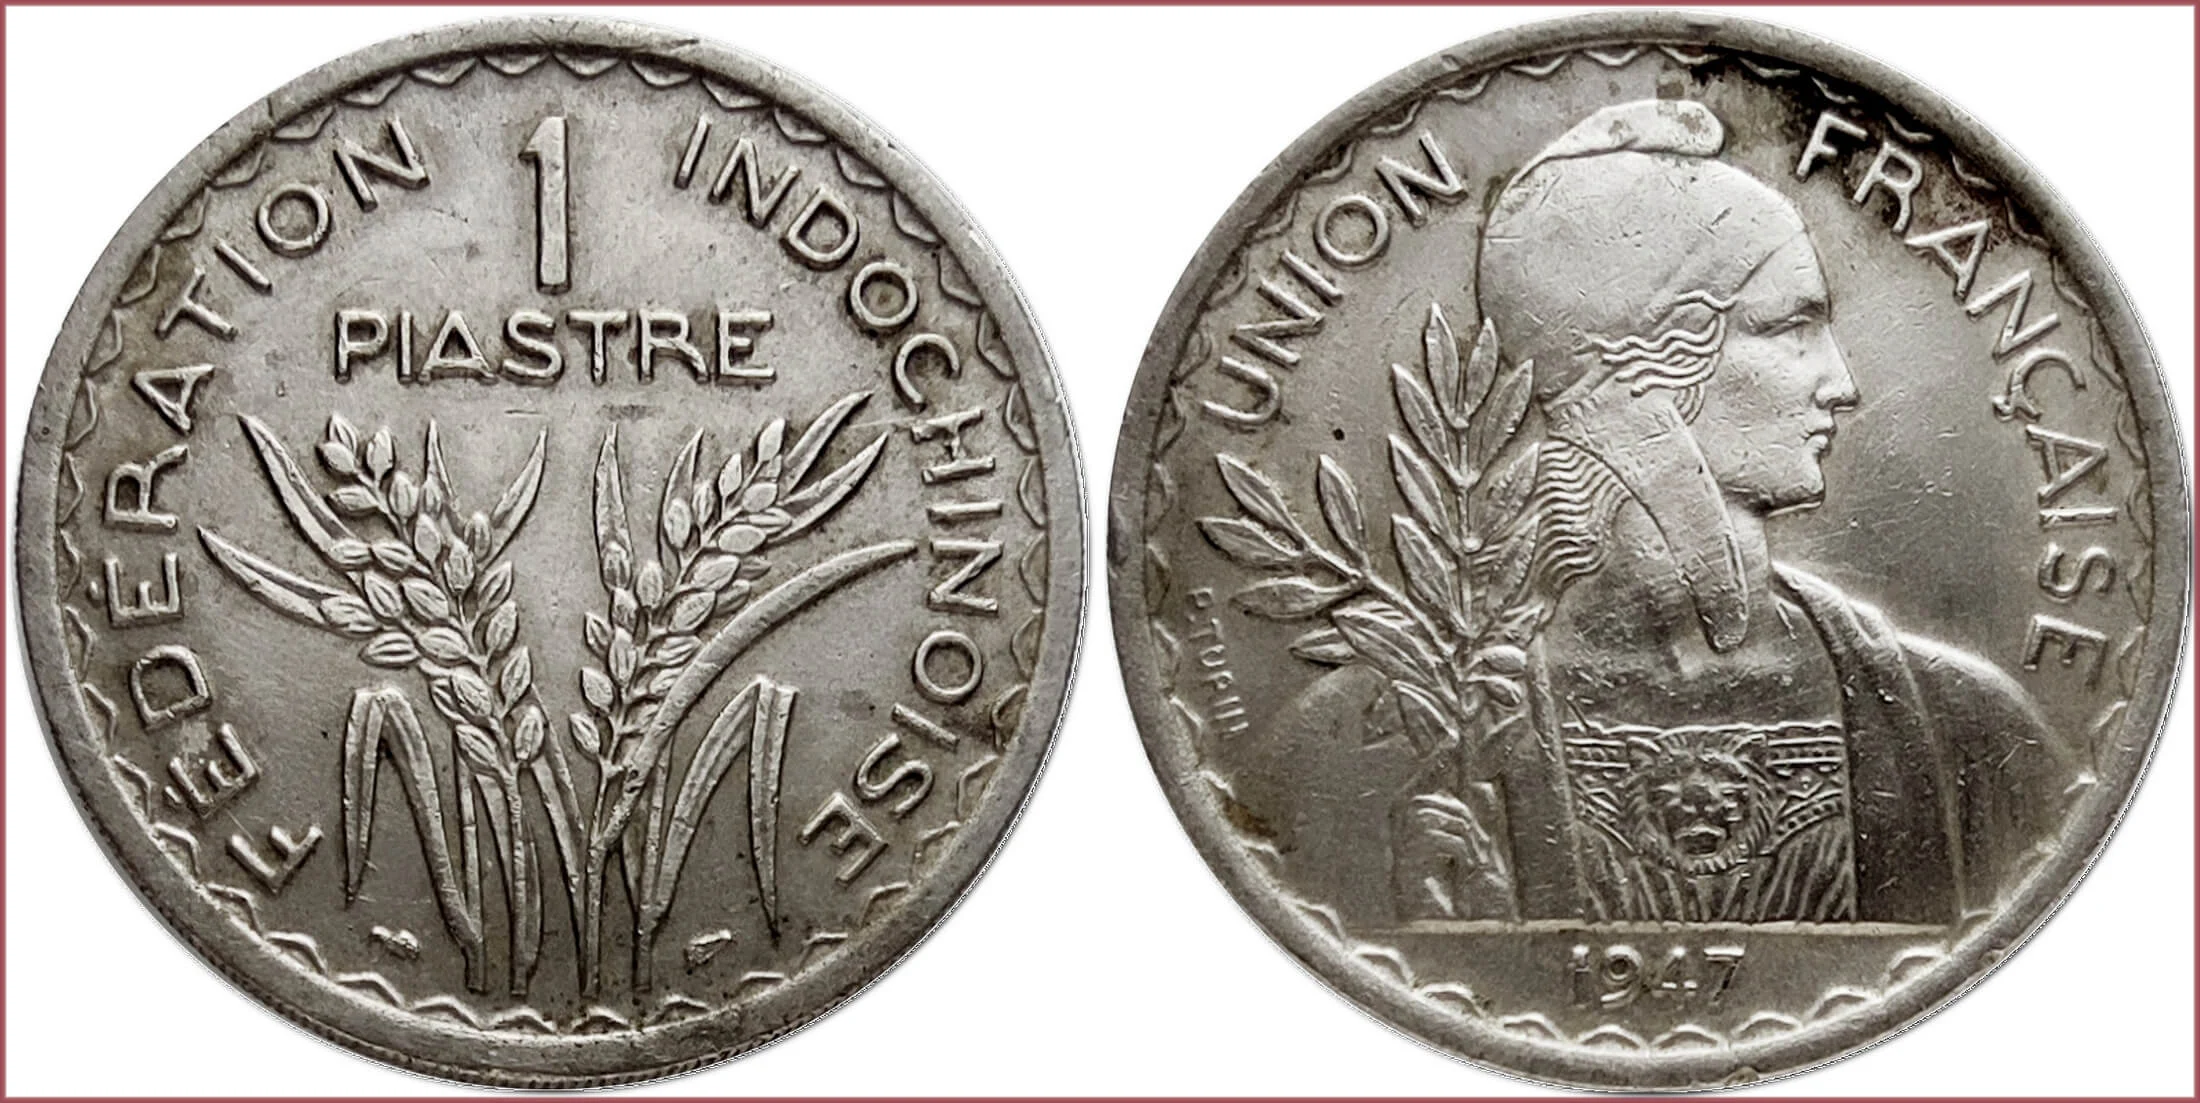 1 piastre, 1947: Indochinese Federation